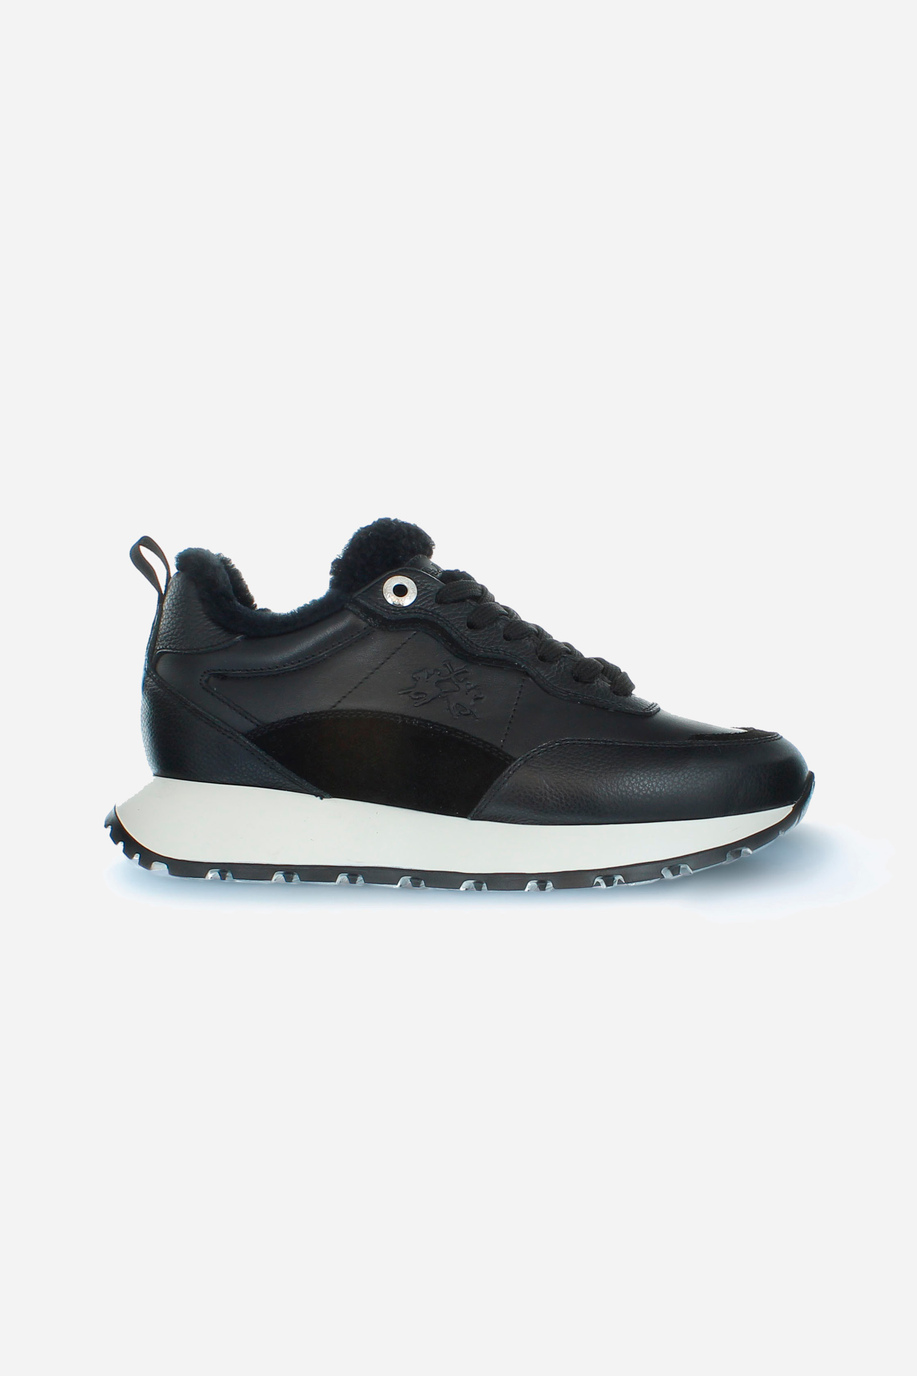 Women's trainer made of soft tumbled leather - Footwear | La Martina - Official Online Shop